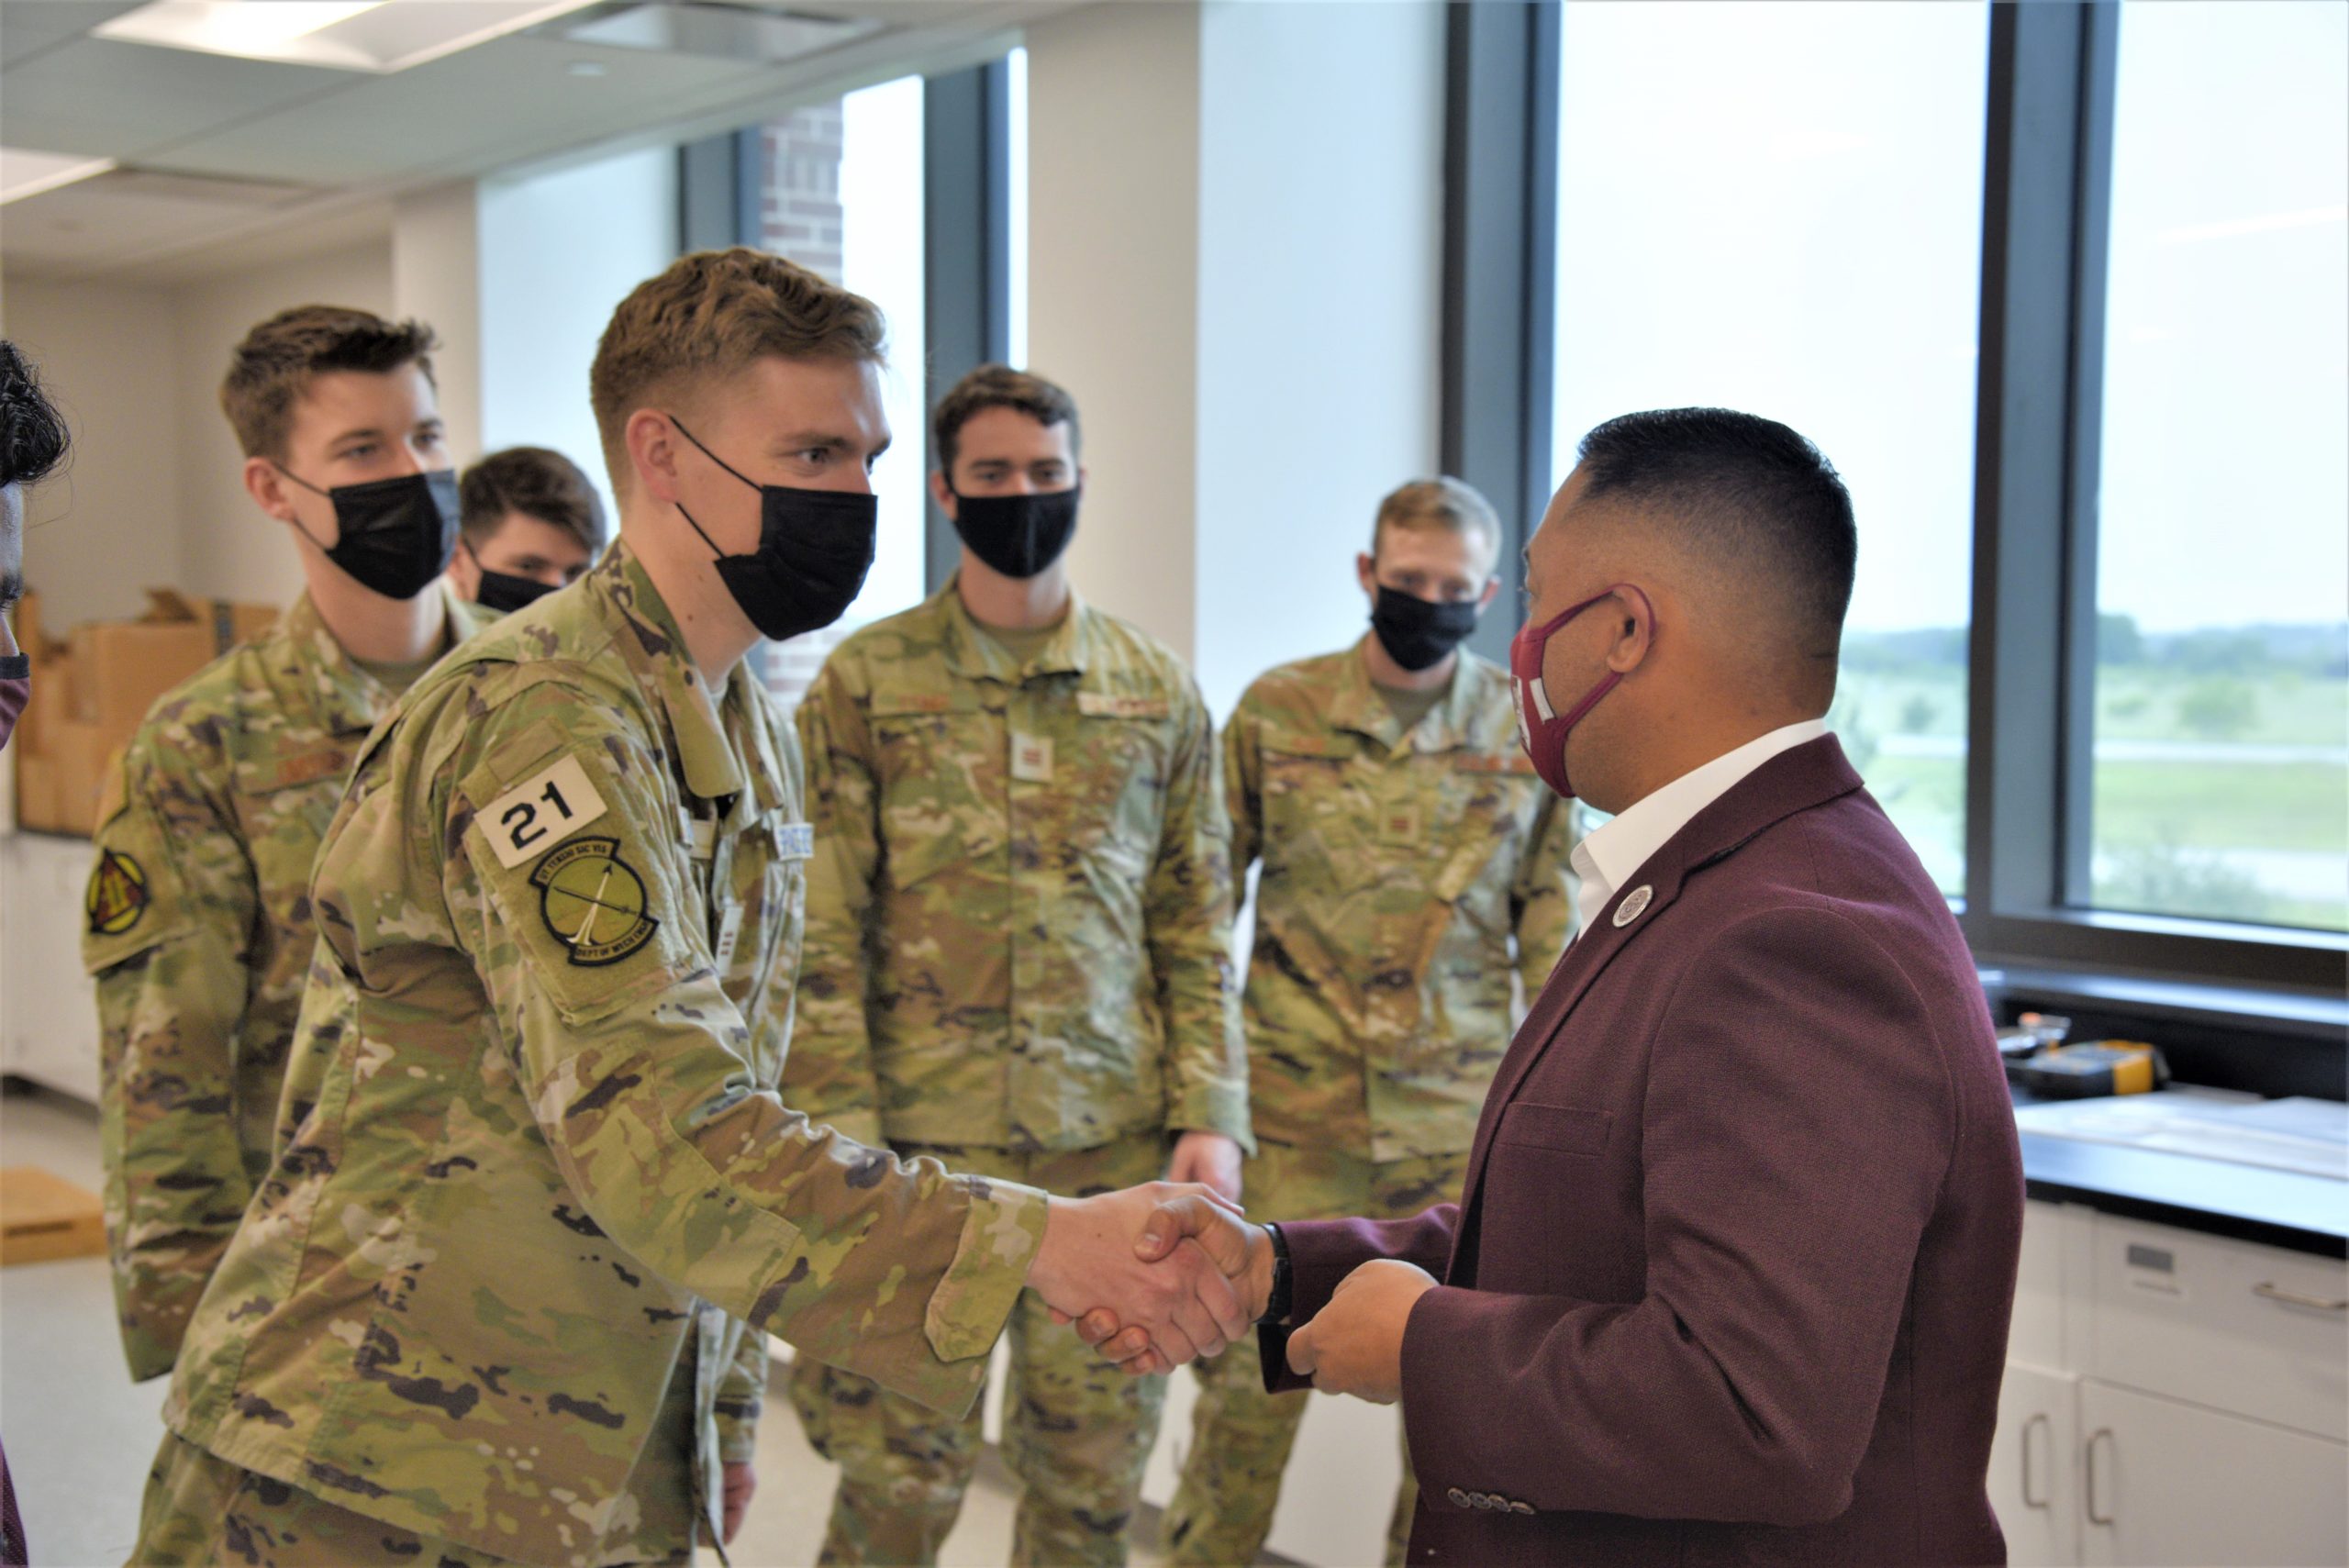 Ross Guieb, BCDC executive director, passes a BCDC challenge coin to Cadet Jon Gabriel, USAFA, during the cadets' visit to Texas A&M University to test their senior engineering capstone design project.